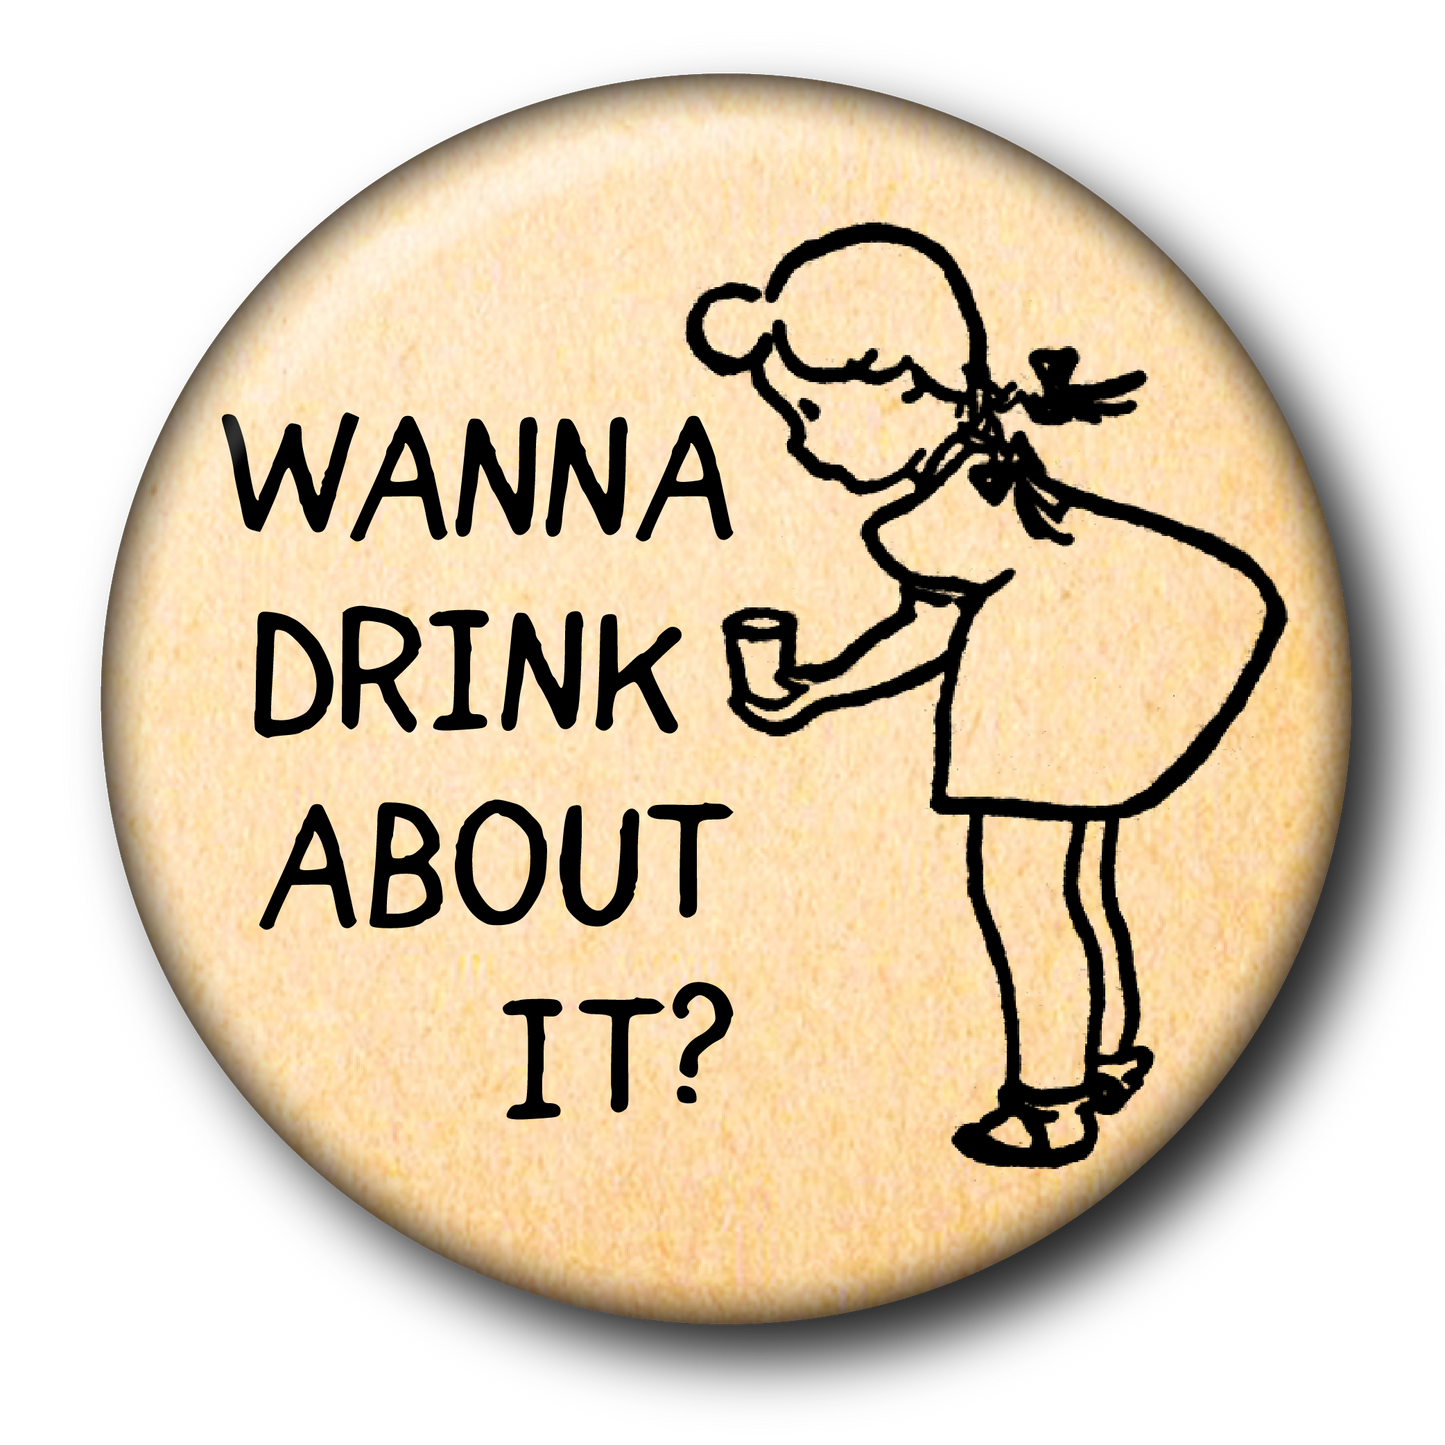 Wanna drink about it? (Magnet): Small Magnet